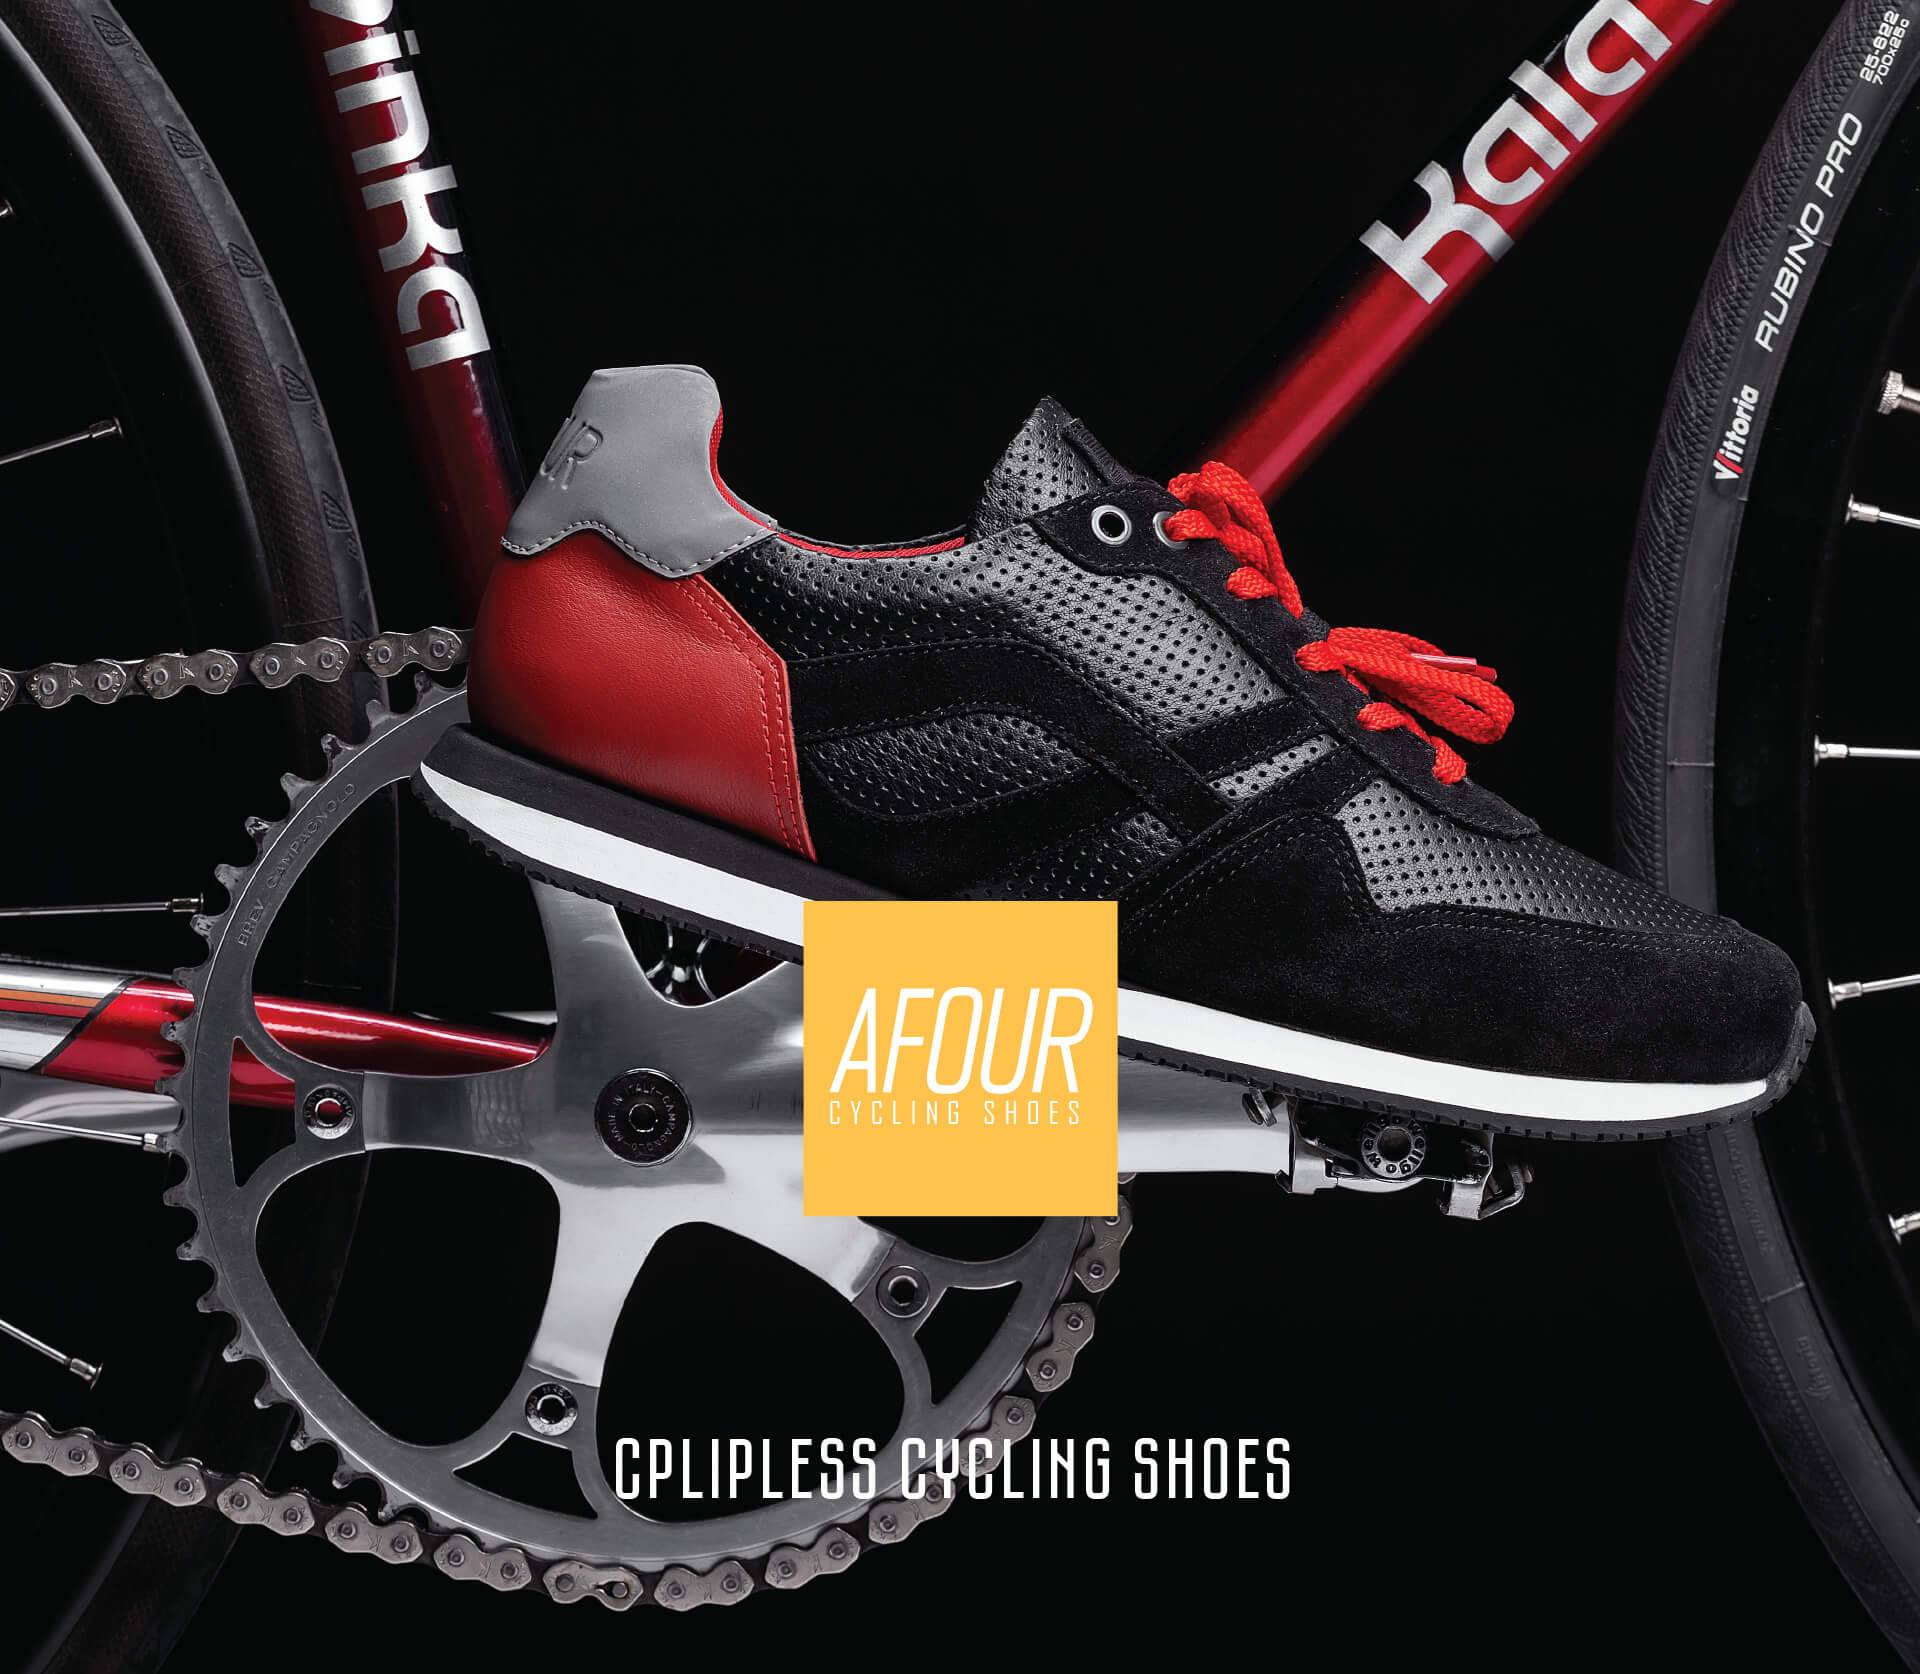 SPD Clipless Cycling Shoes - AFOUR